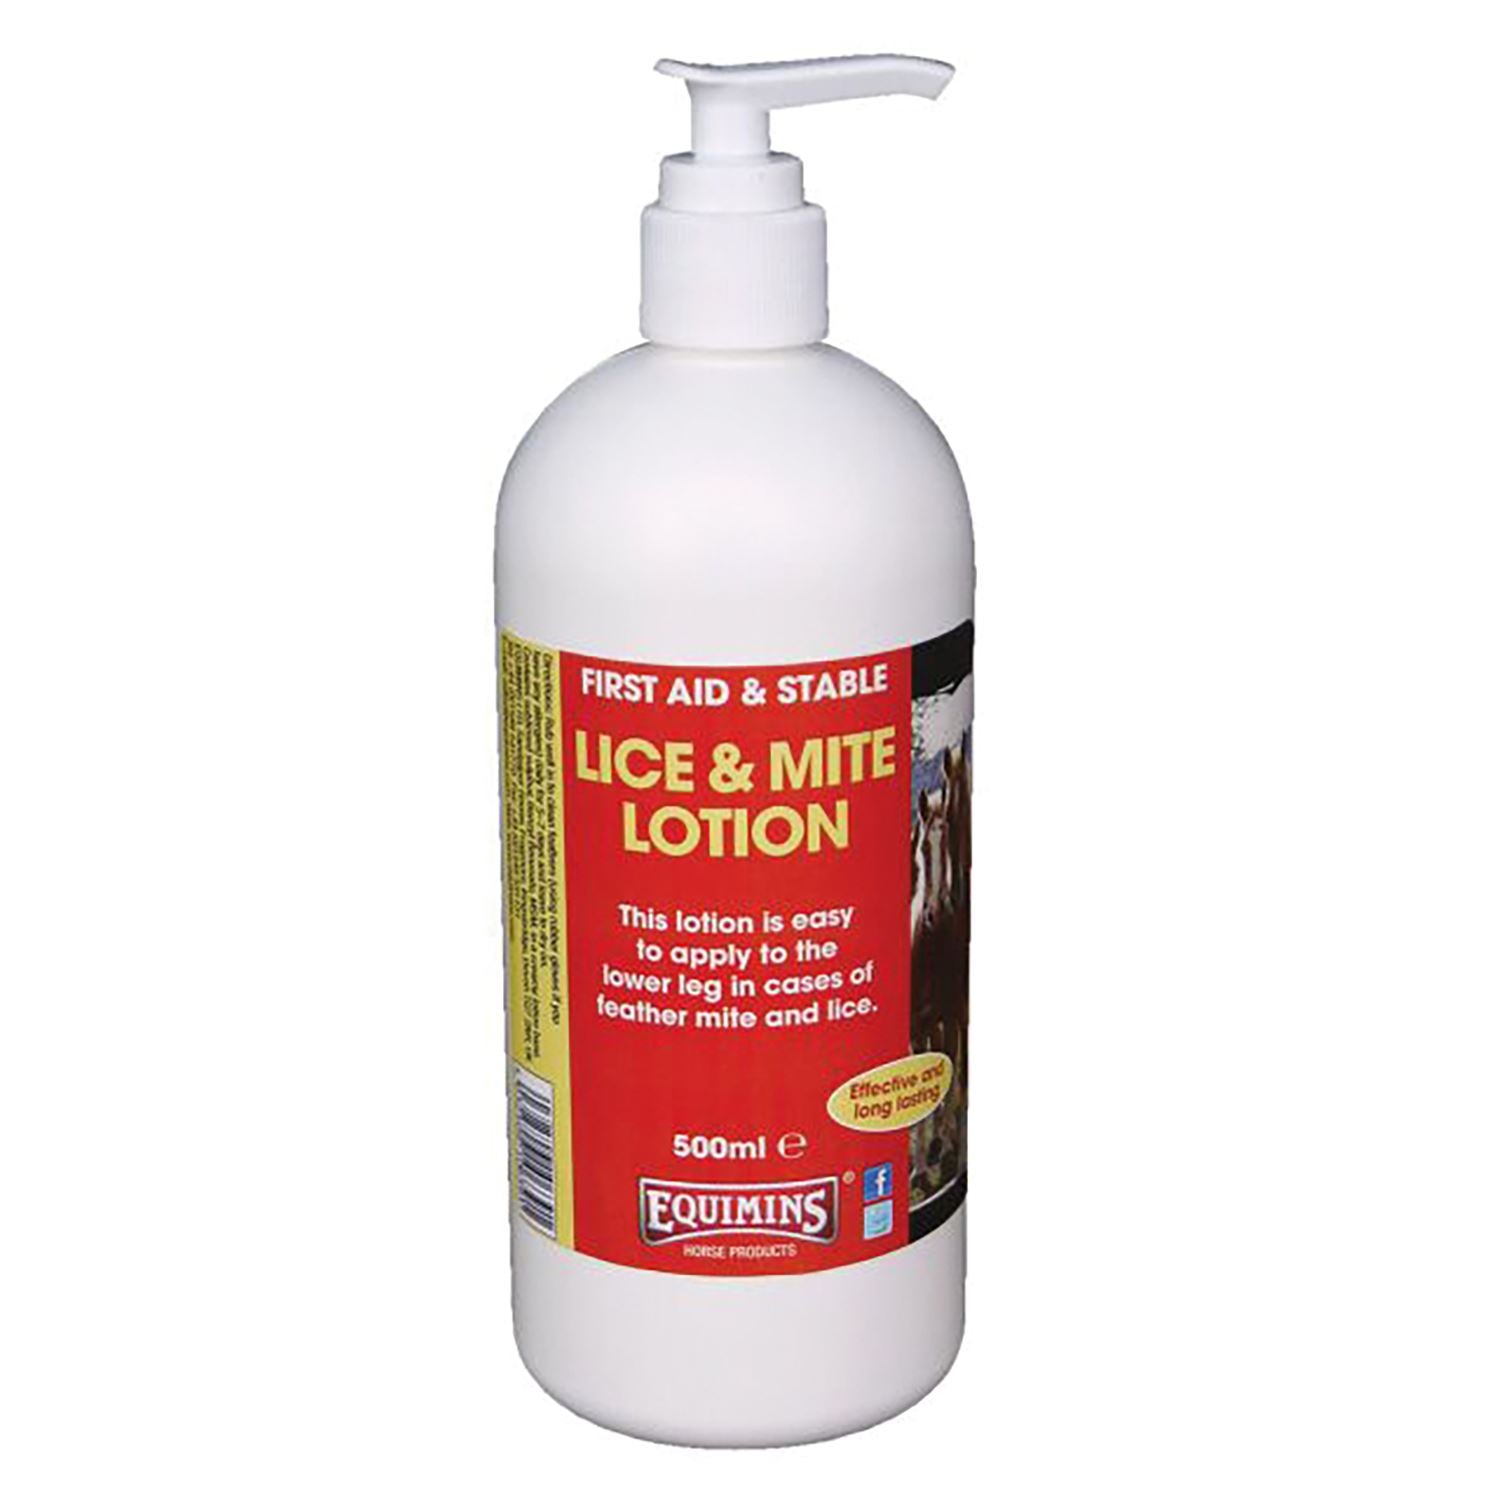 Equimins Lice & Mite Lotion - Just Horse Riders